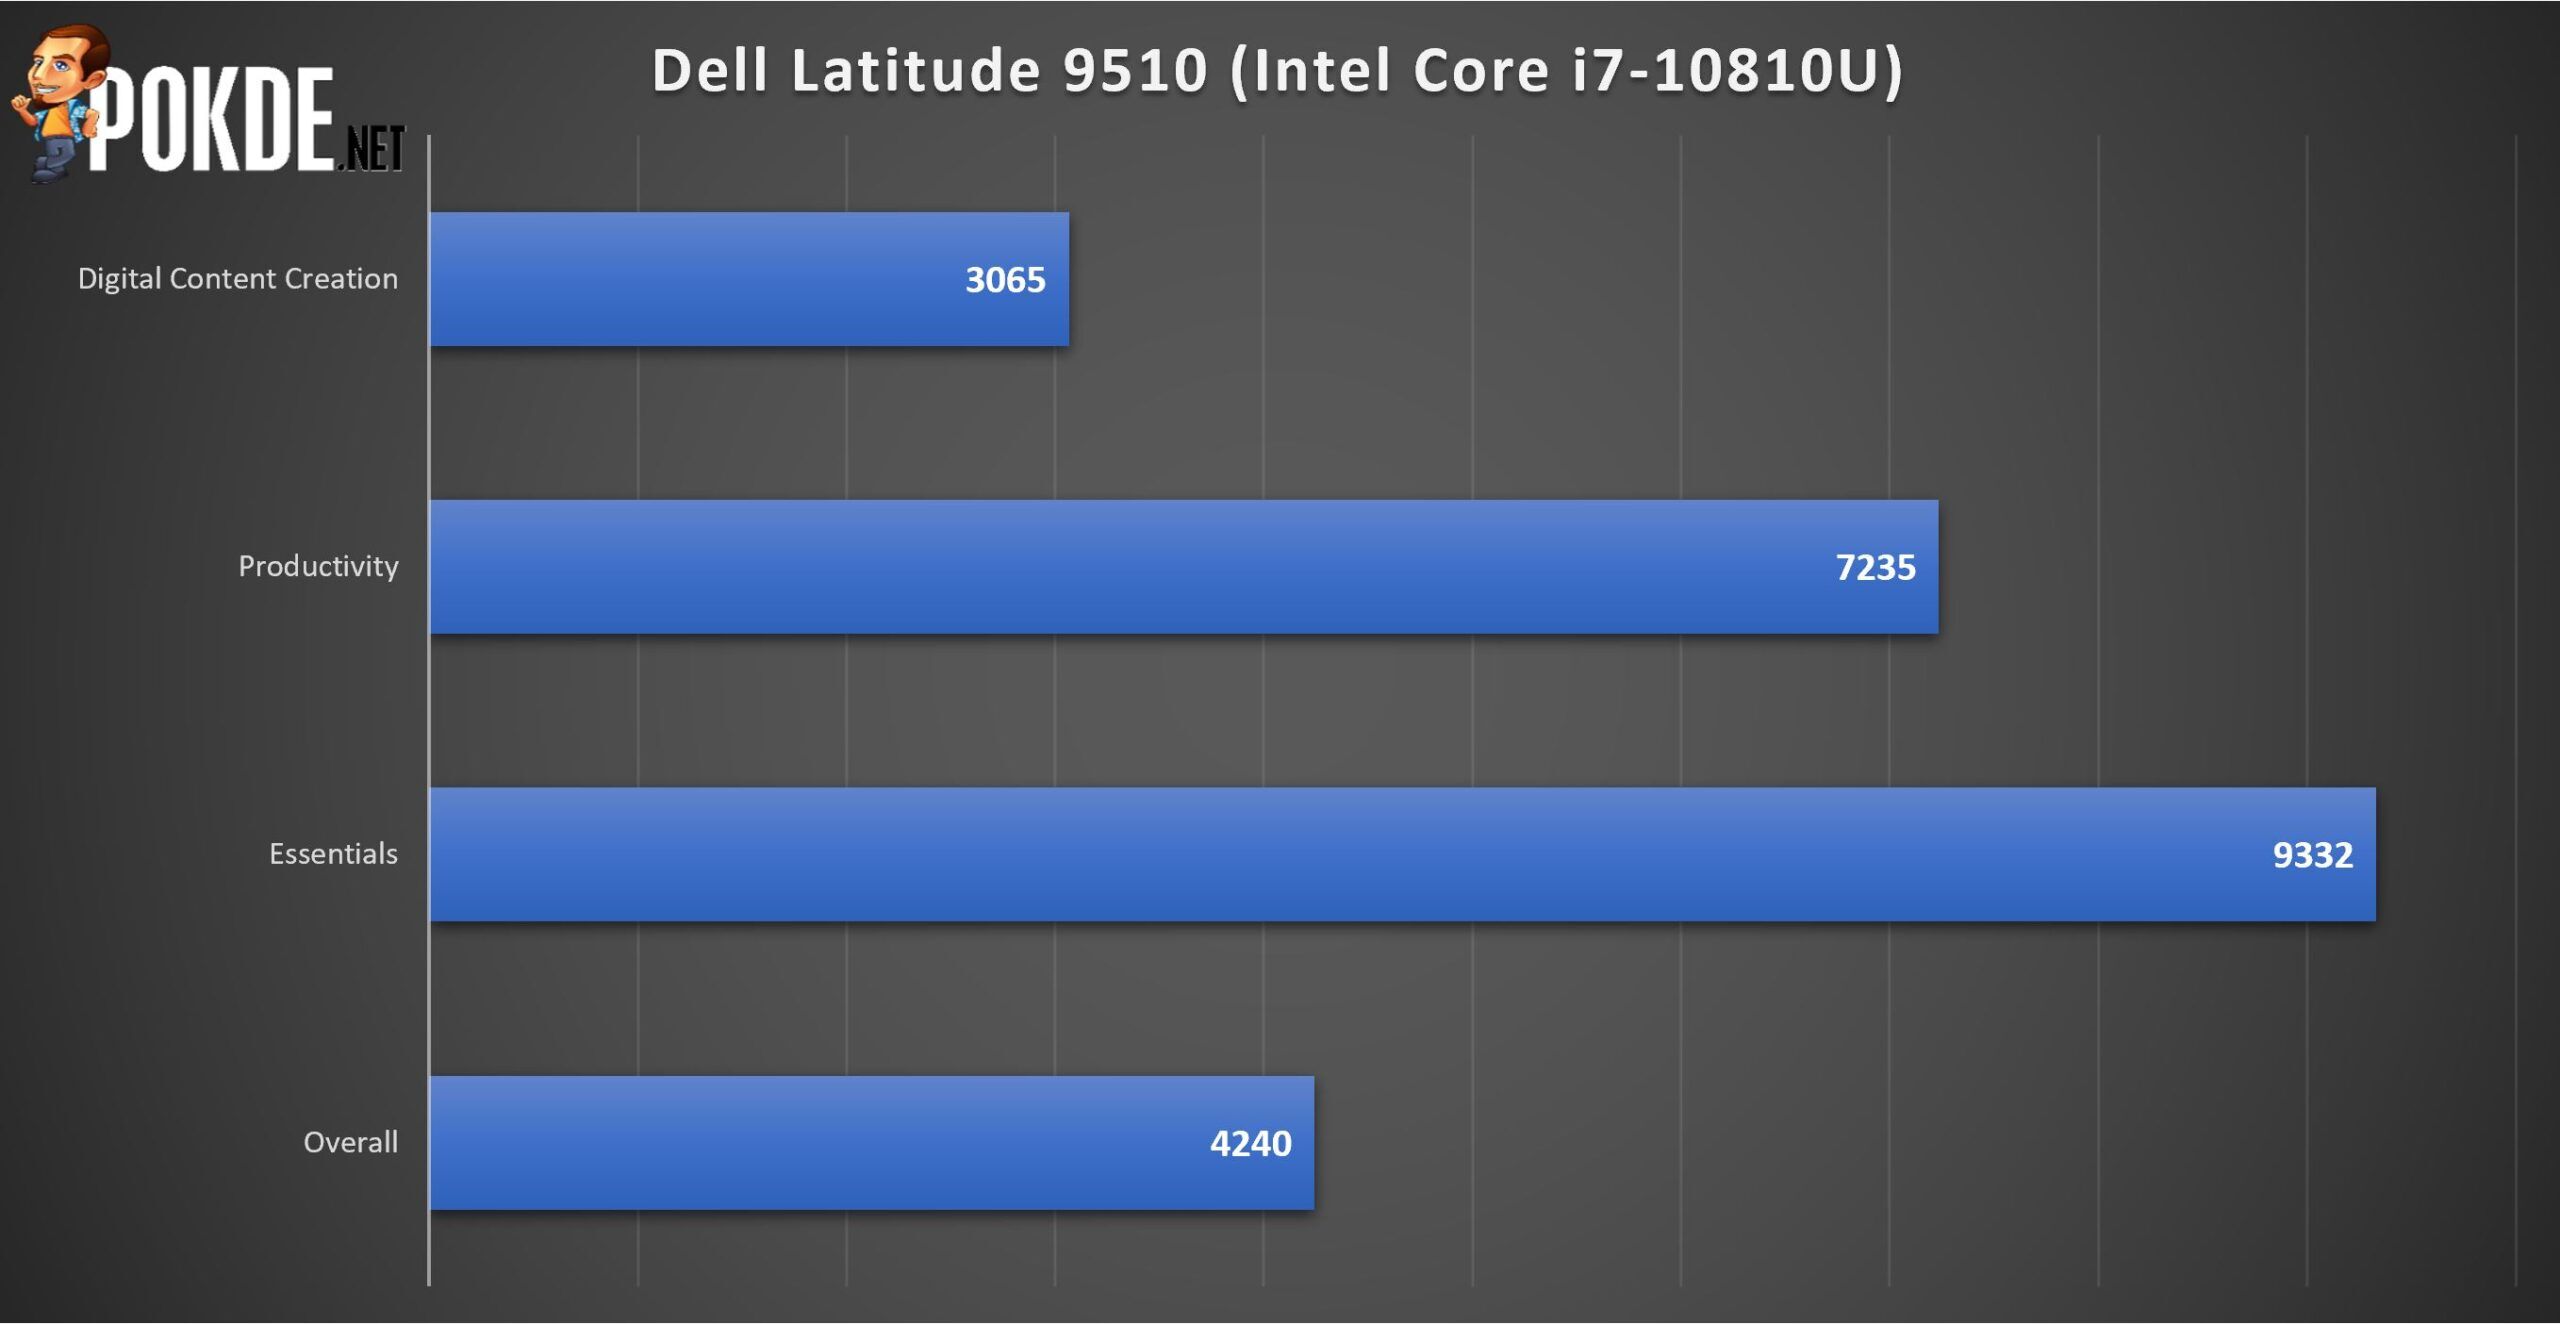 Dell Latitude 9510 2-in-1 Review - When Laptops Truly Mean Business 39